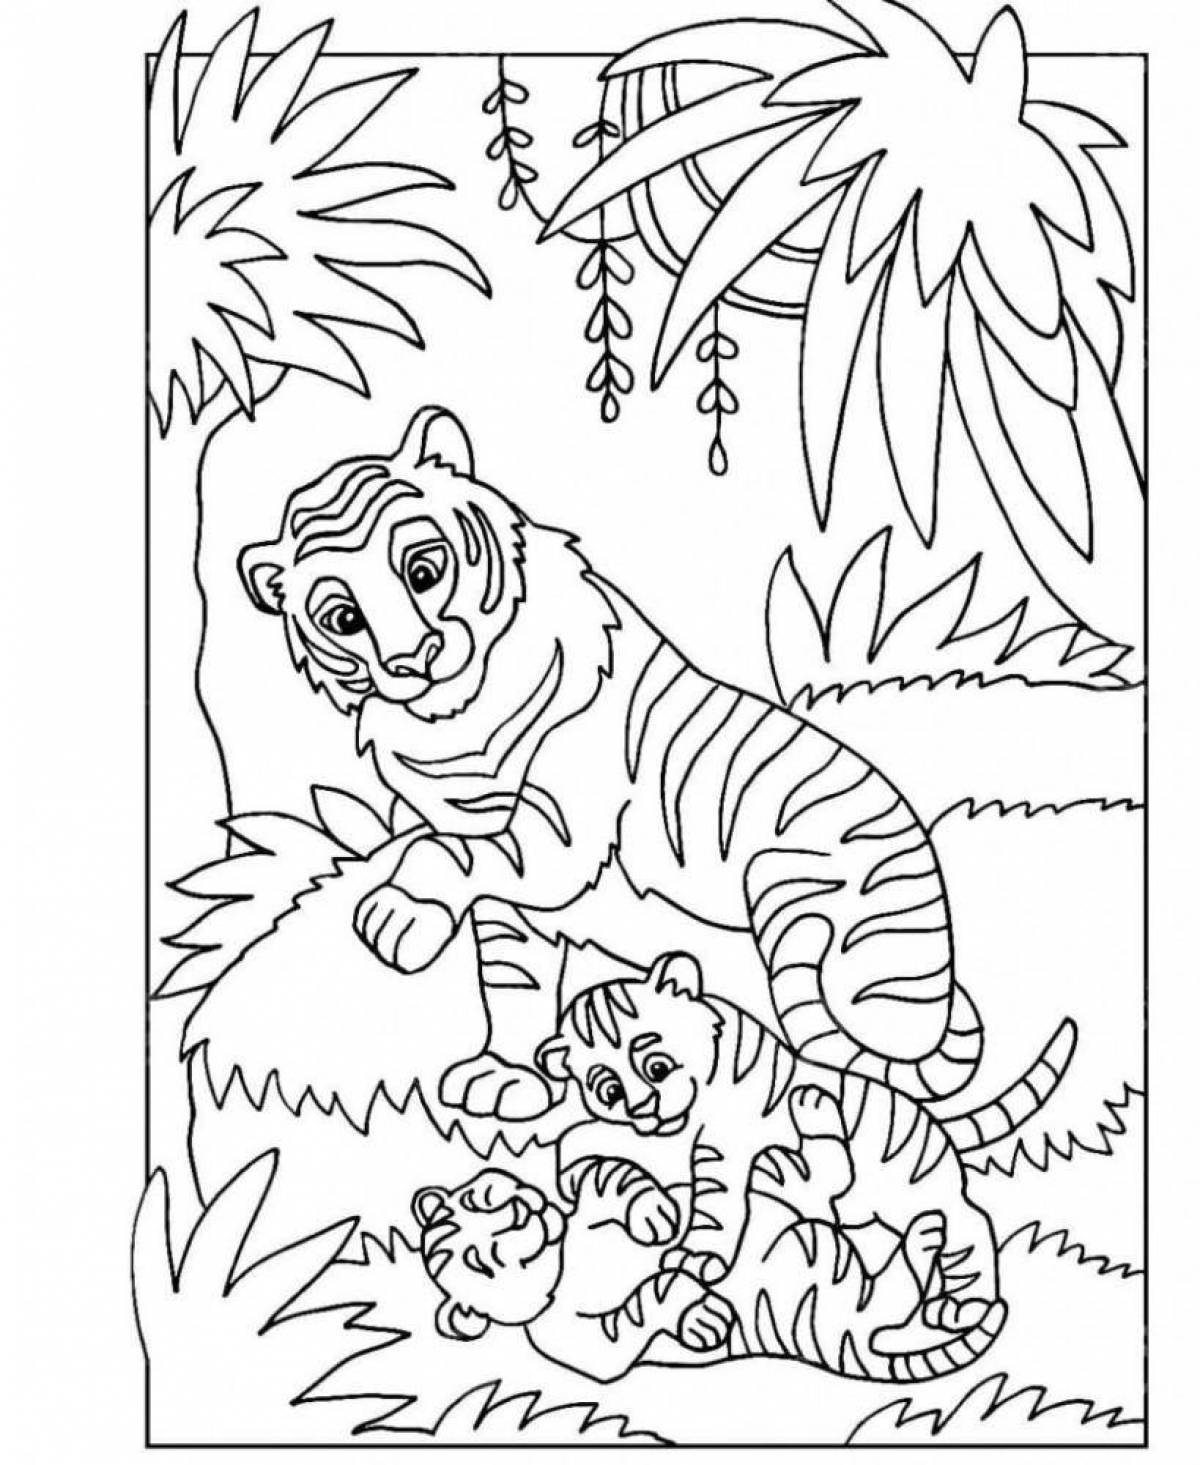 Animated tiger family coloring page